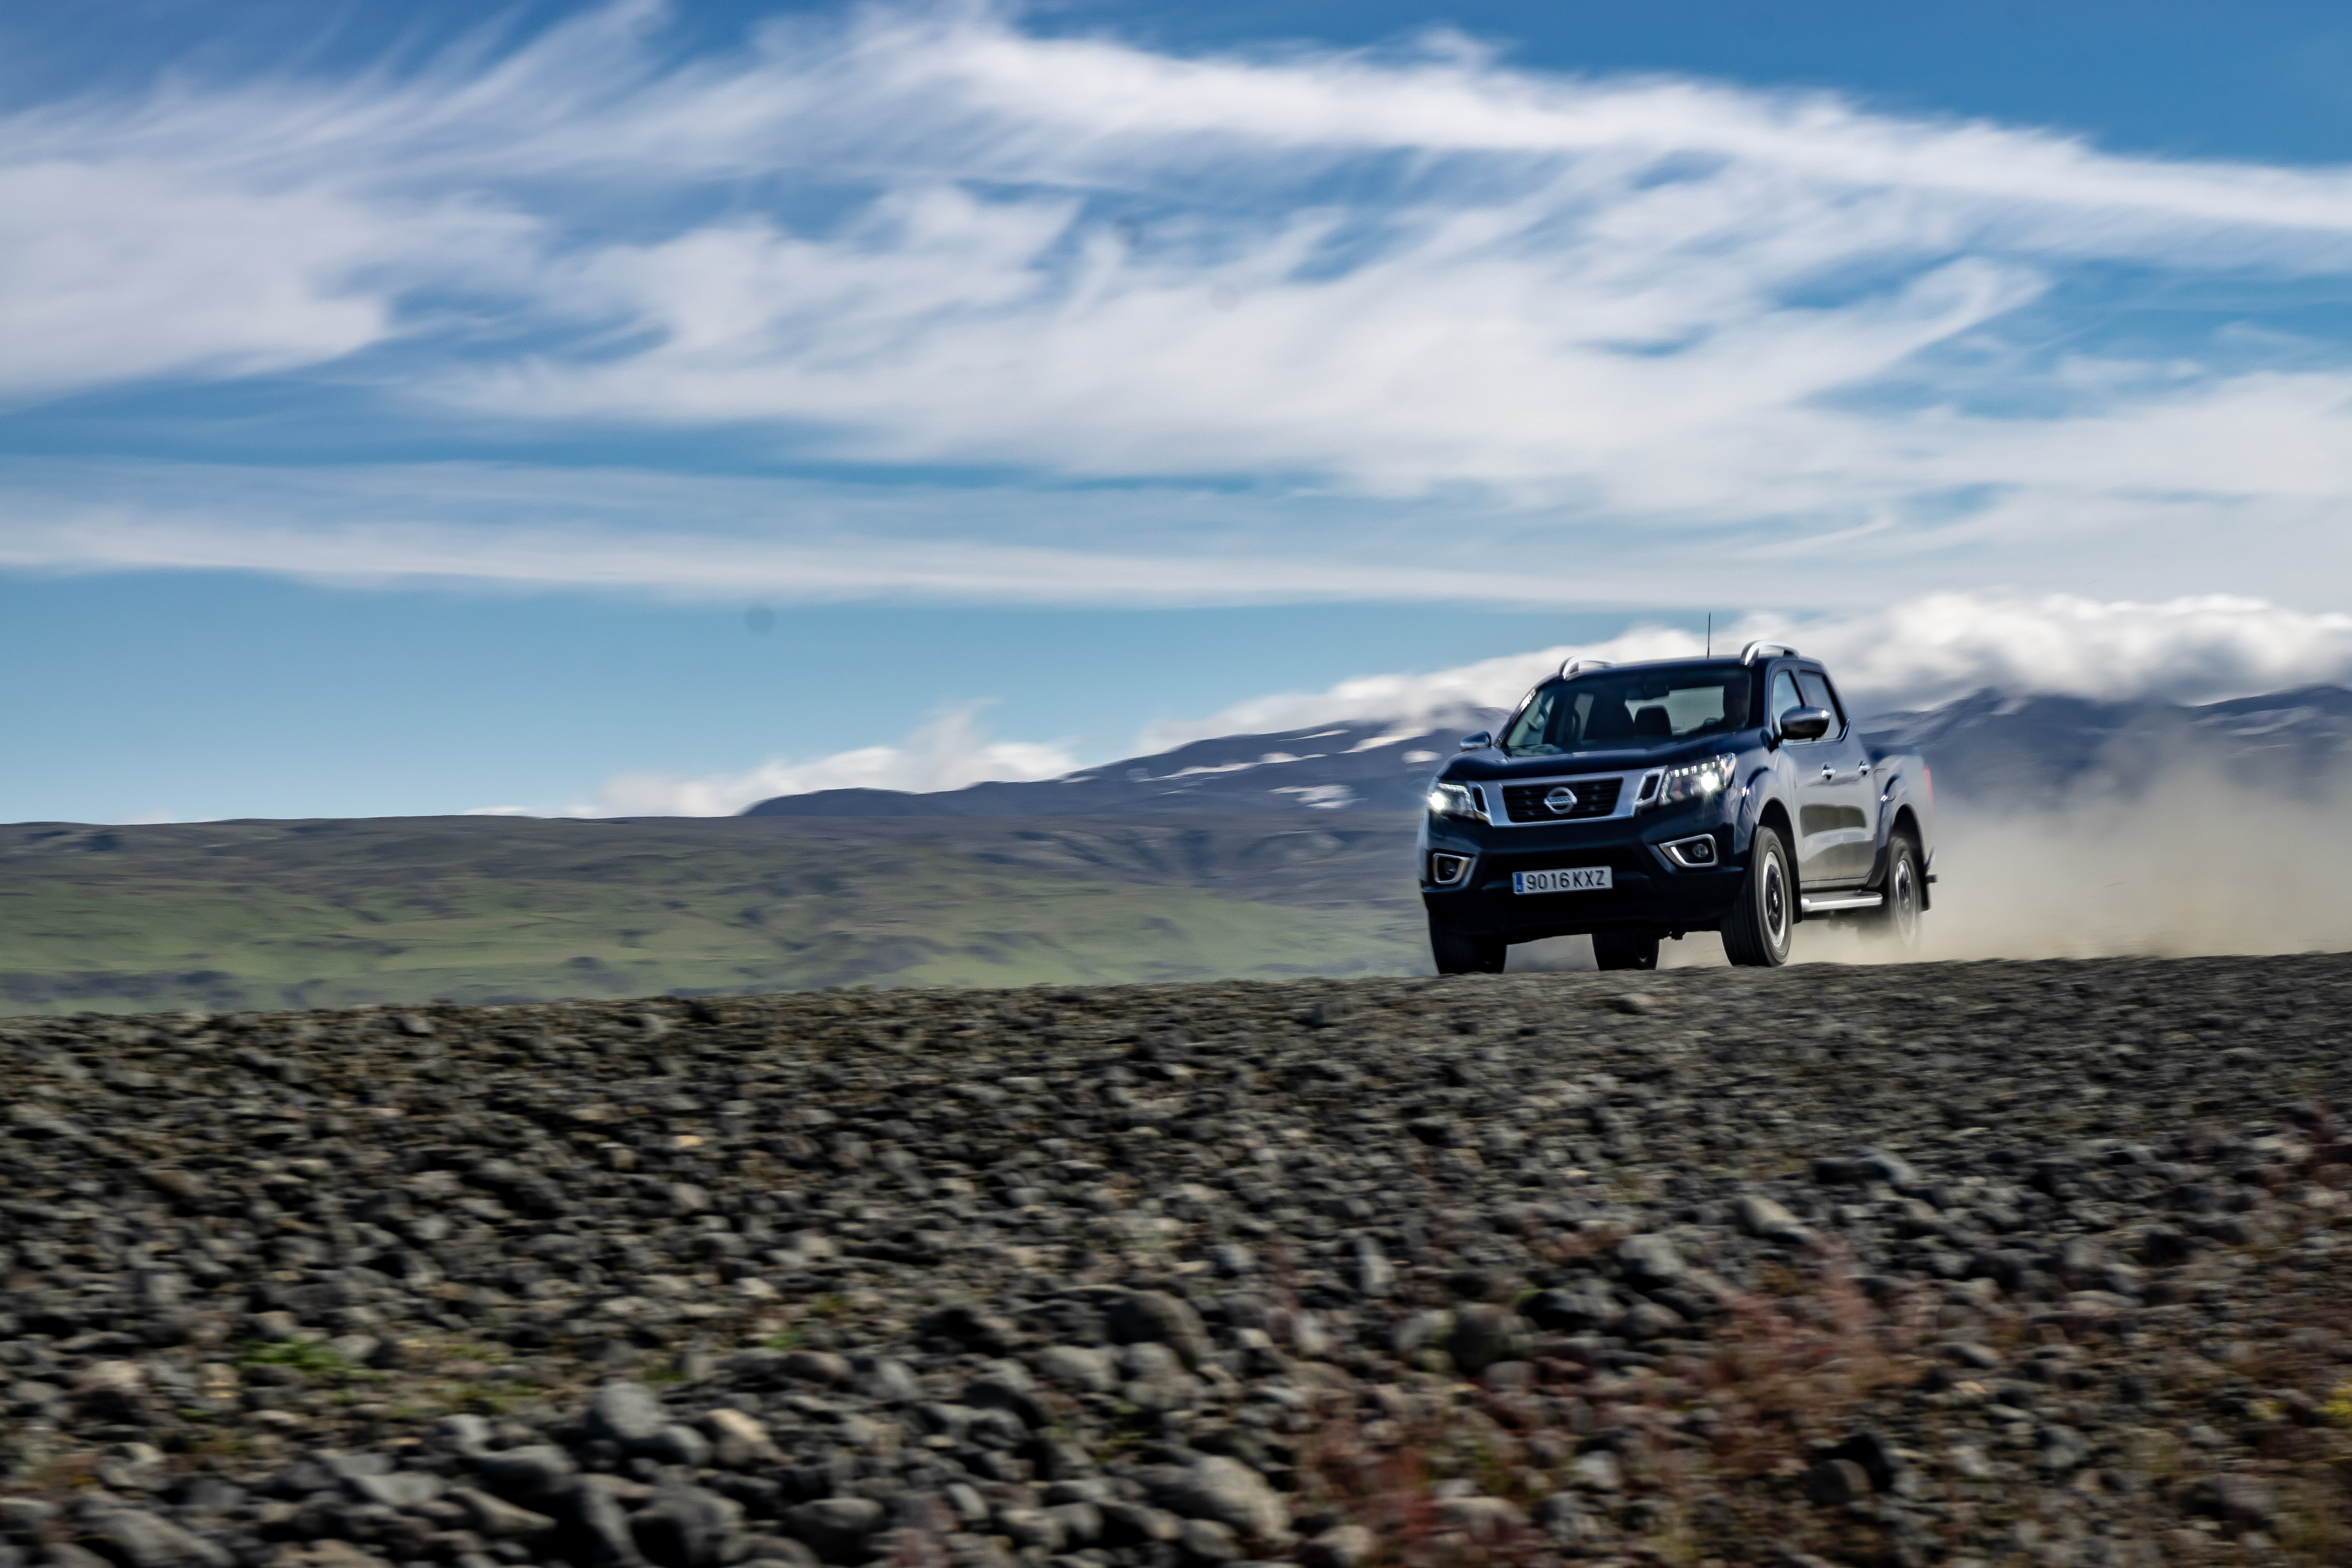 The Navara kicks up a huge plume of dust as it hammers along a track